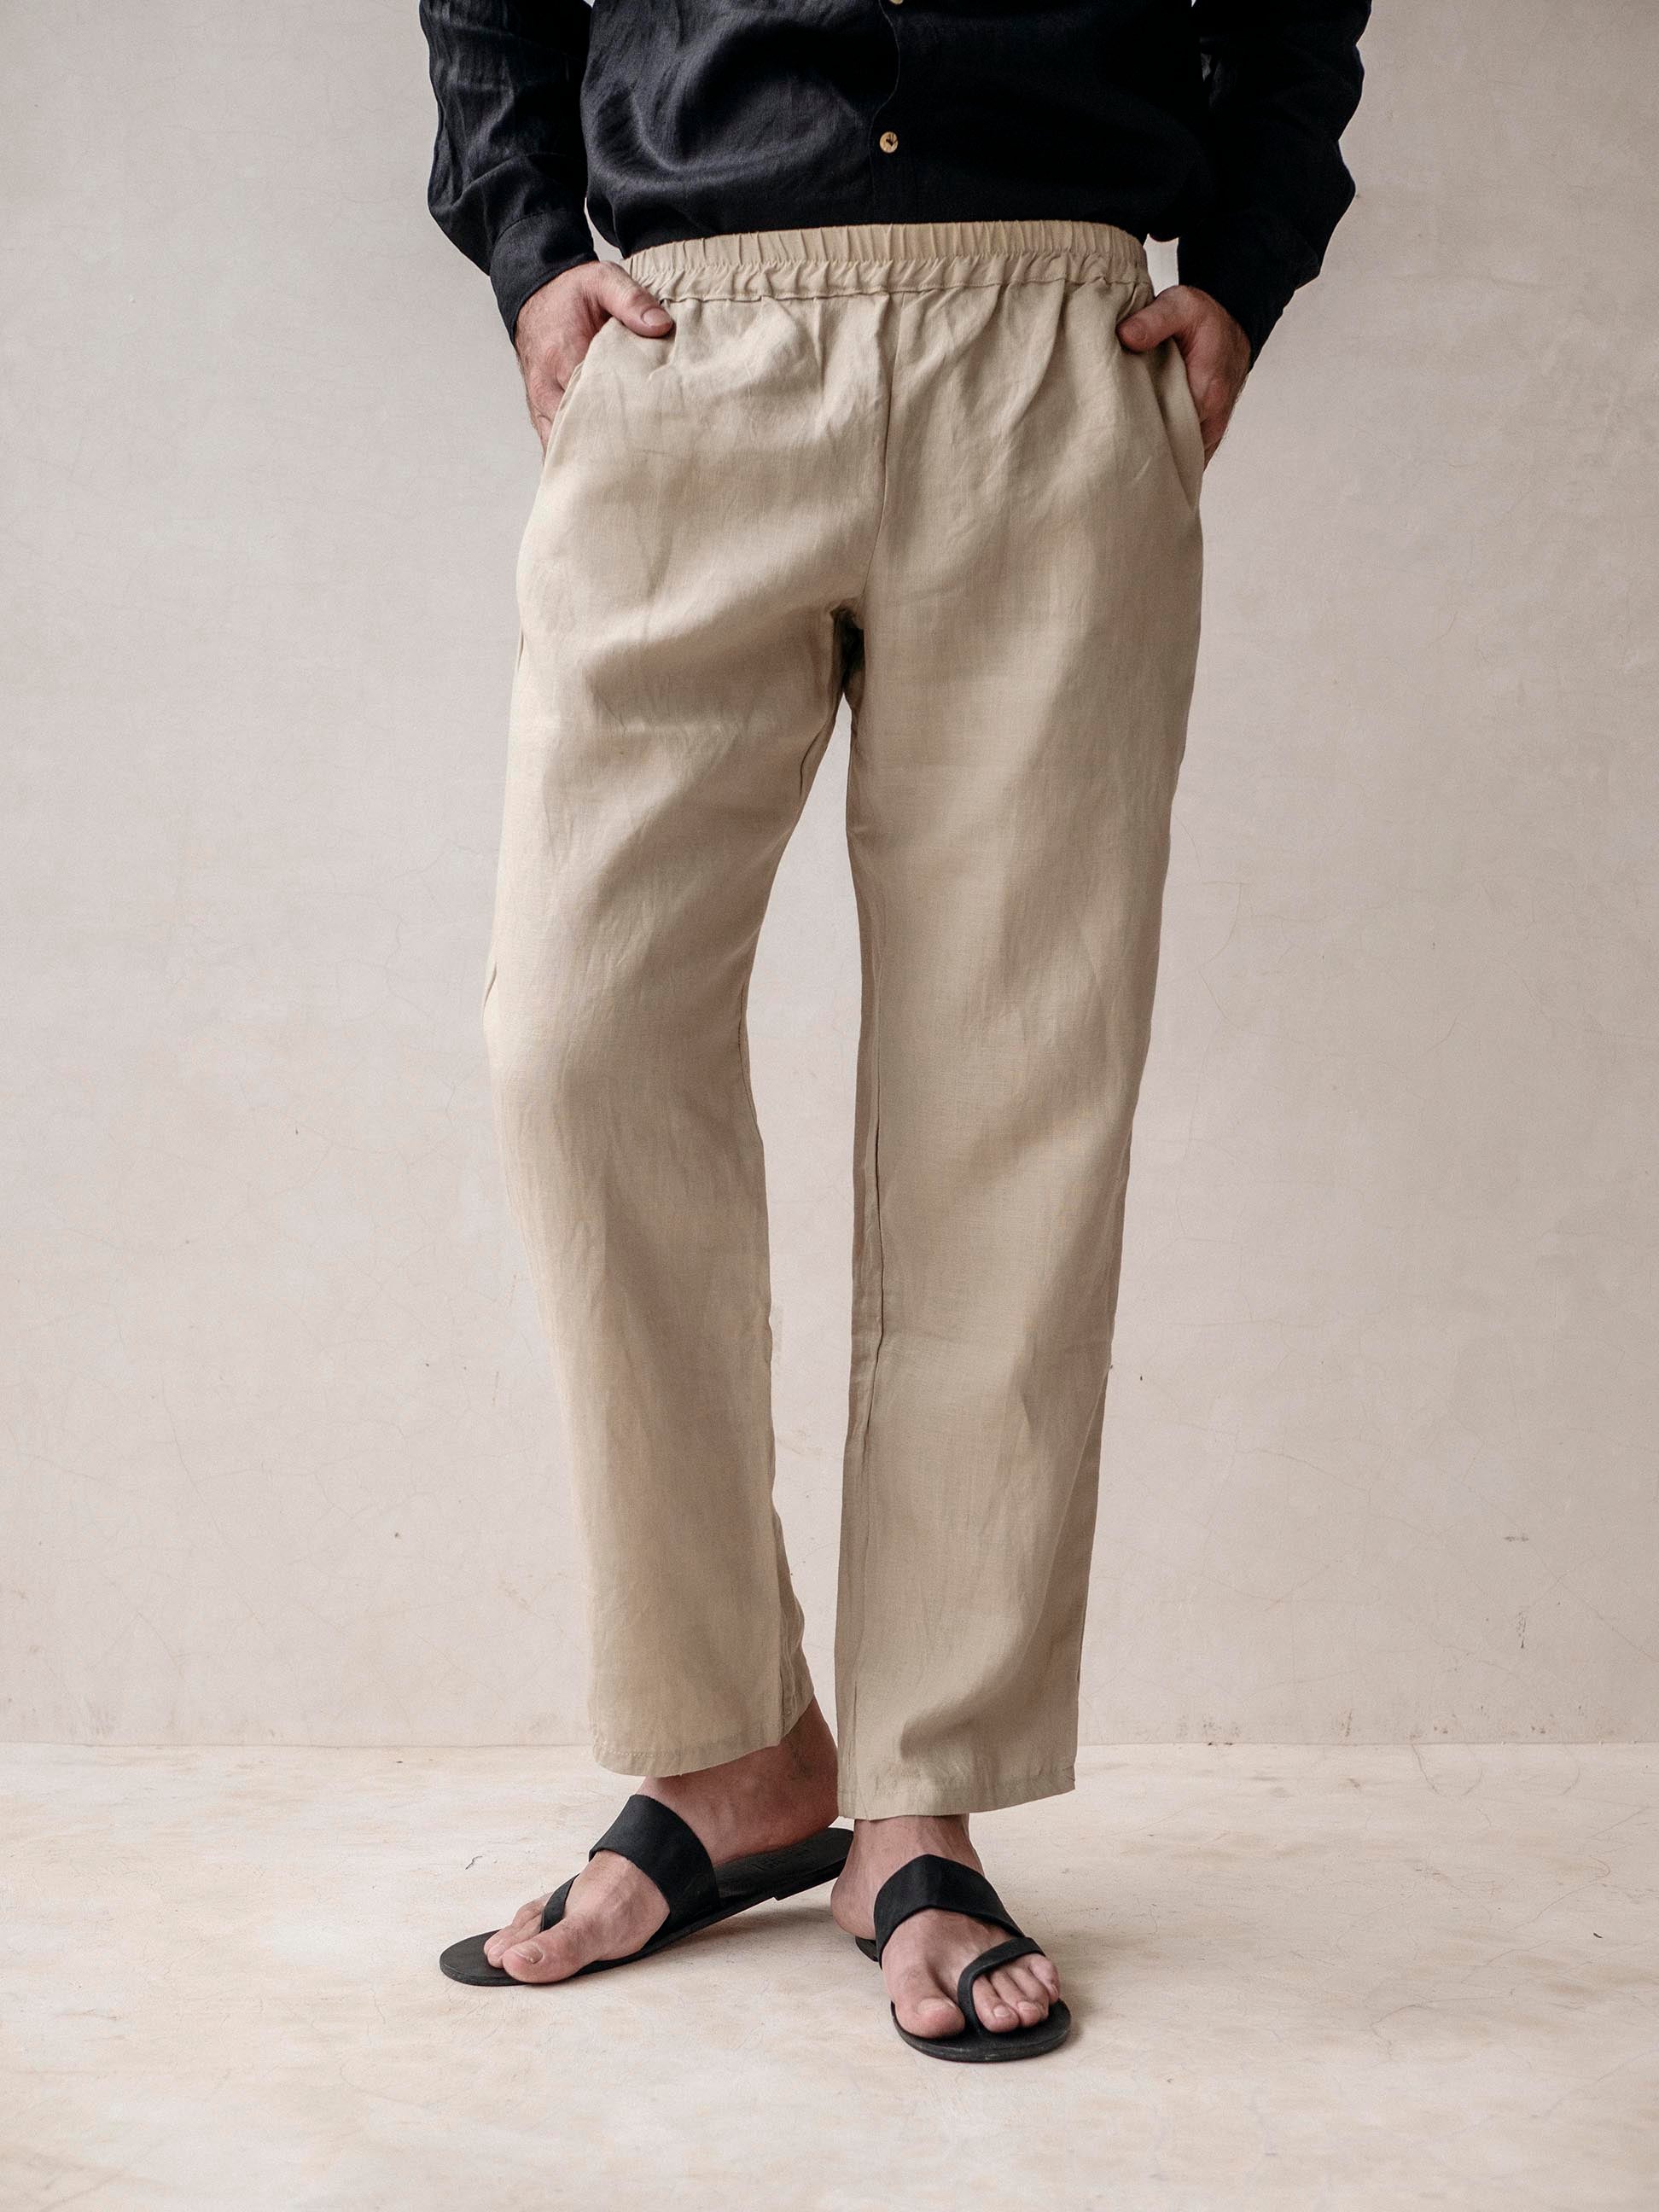 O'Connell's plain front Delave Linen Trousers - Safari Tan - Men's  Clothing, Traditional Natural shouldered clothing, preppy apparel